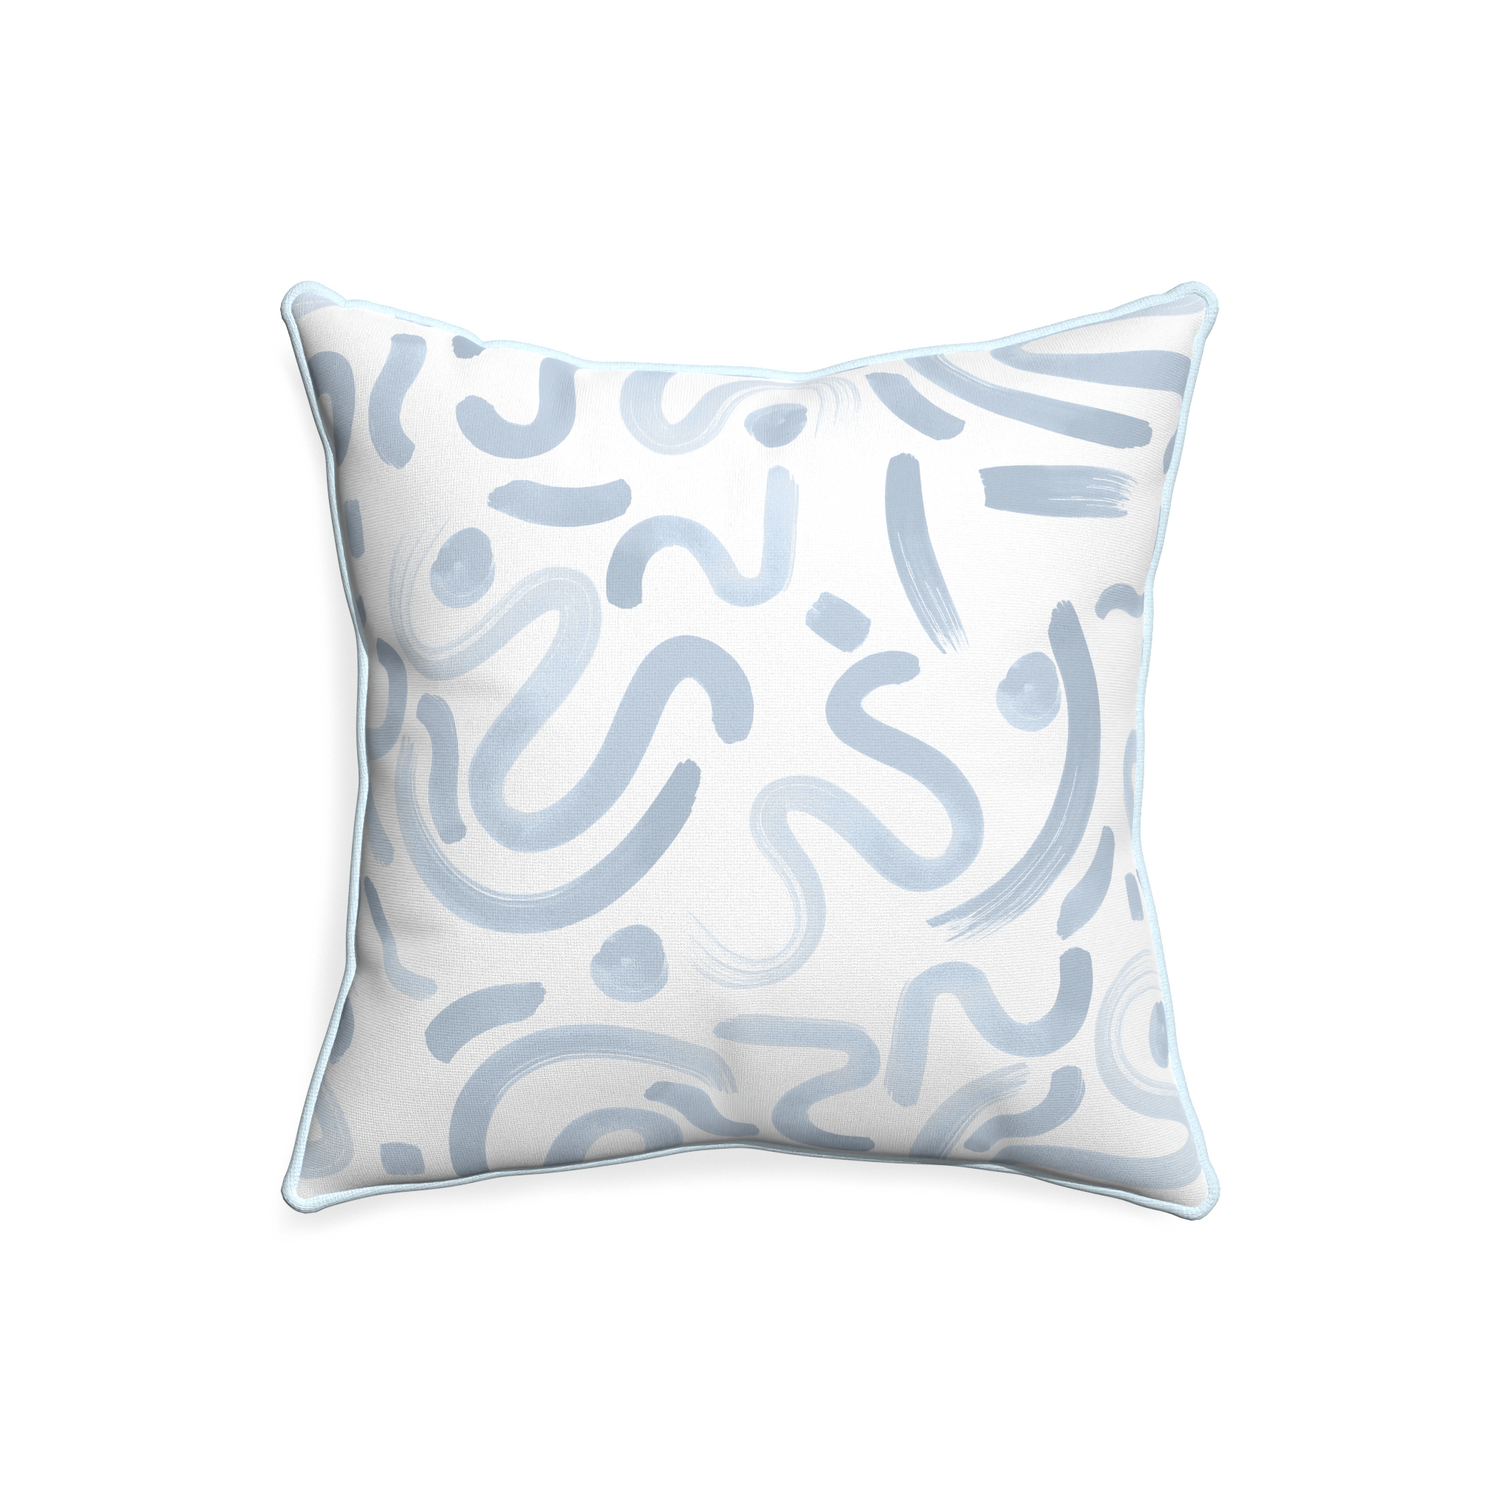 20-square hockney sky custom pillow with powder piping on white background